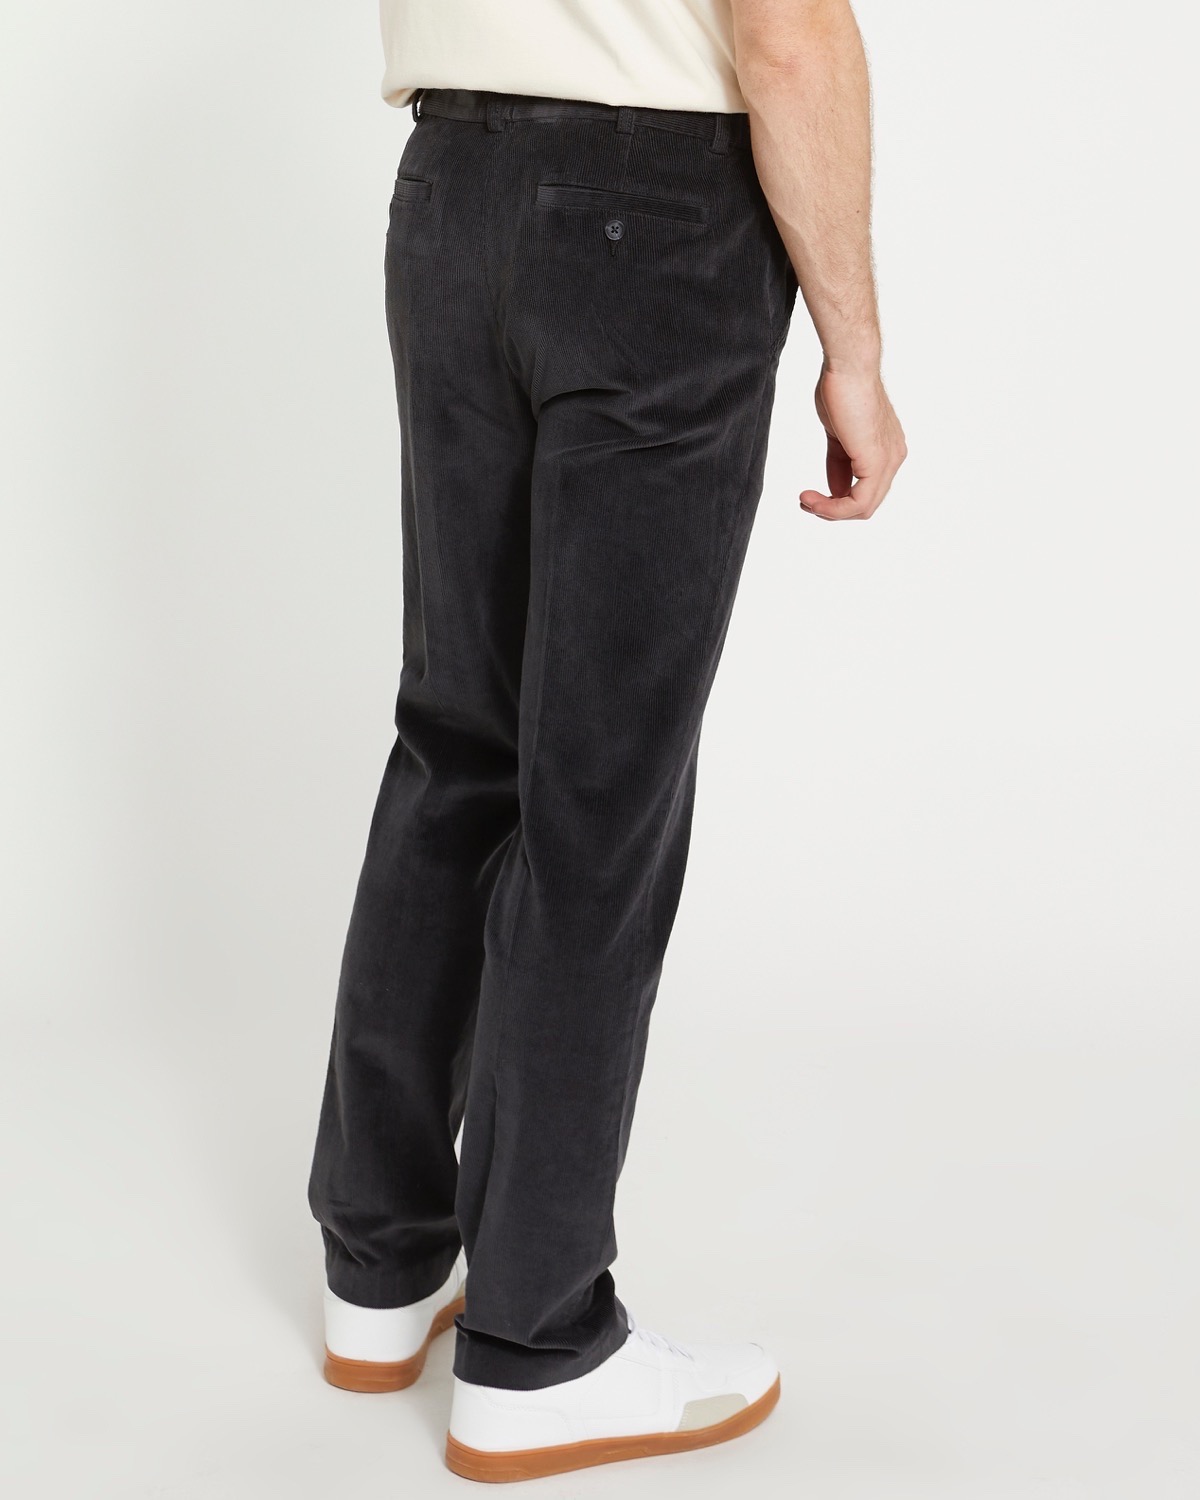 Buy high-quality corduroy trousers online | MEYER-trousers